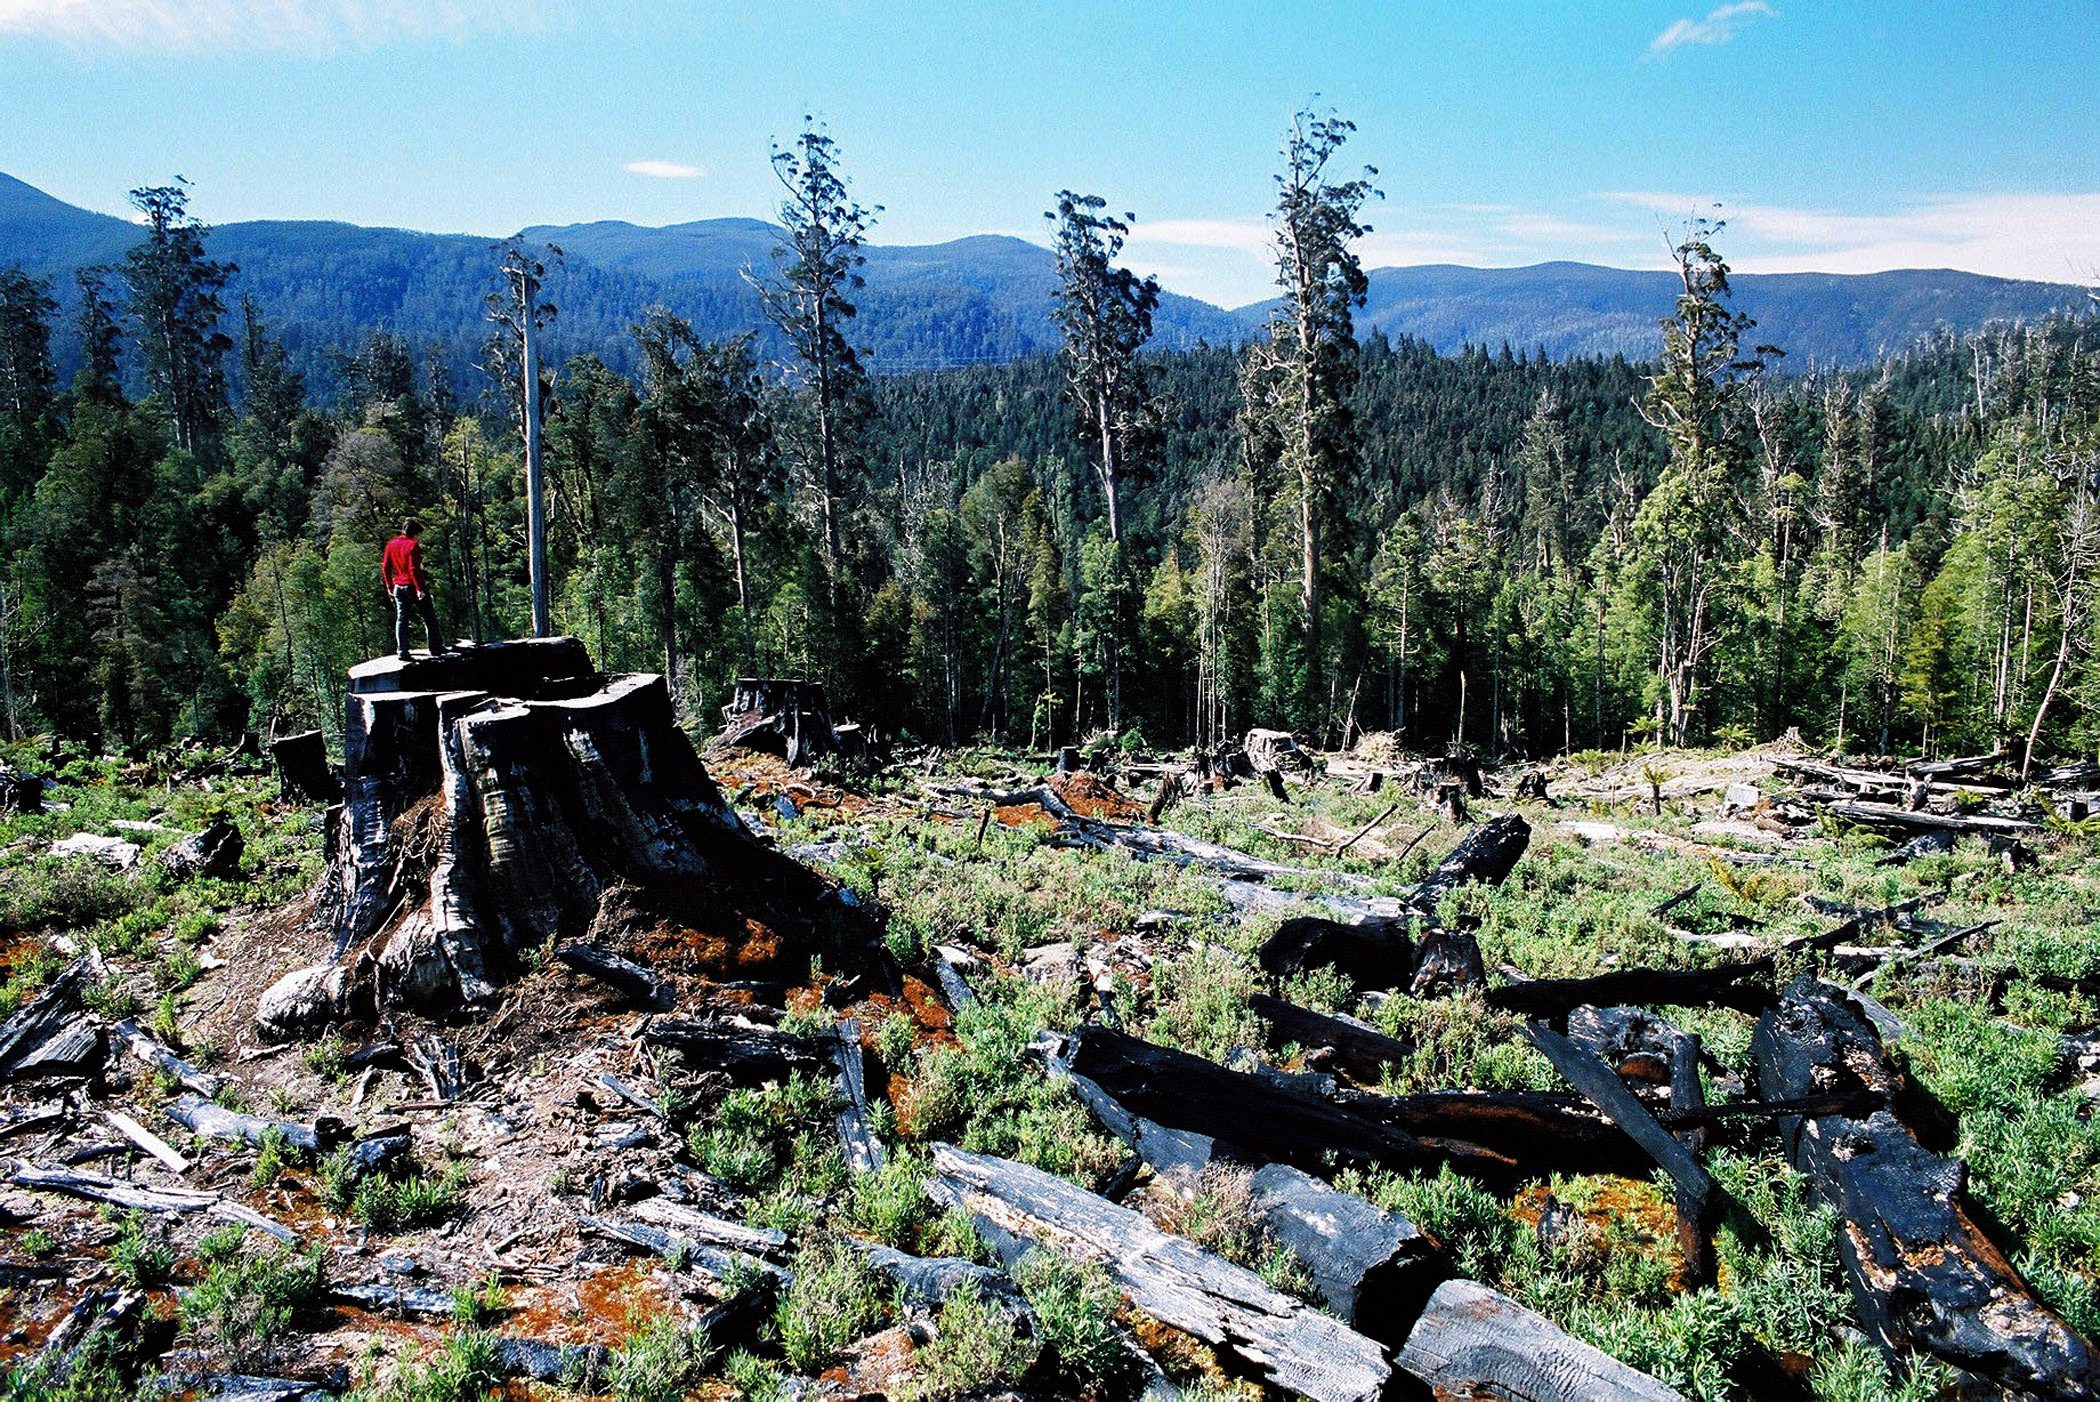 An area of Tasmania's Styx forest after logging has taken place on Nov. 12, 2003. (Hancock—EPA)